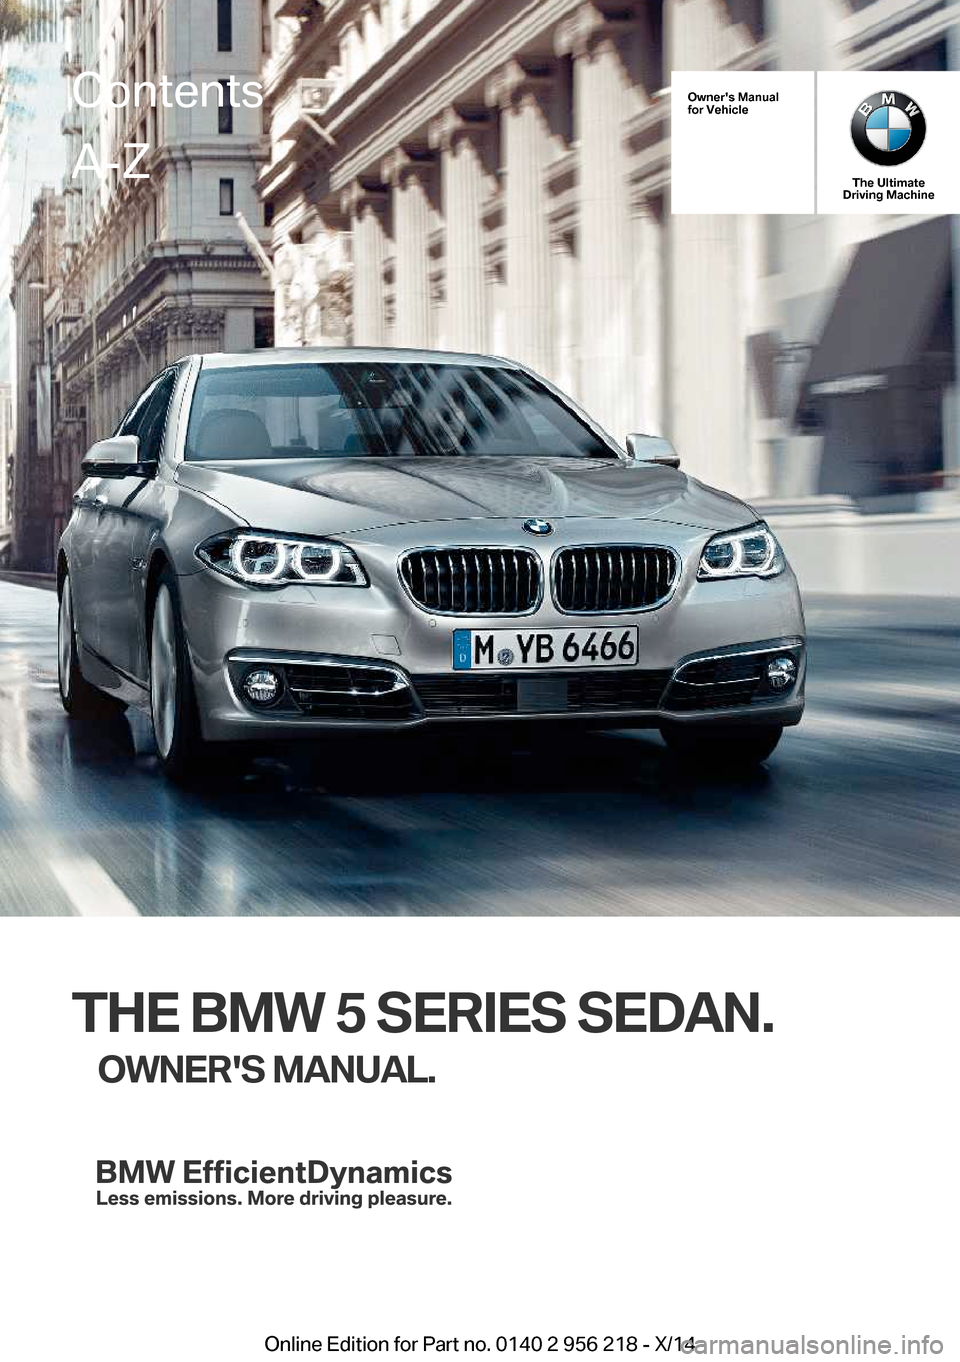 BMW 5 SERIES 2014 F10 Owners Manual Owners Manual
for Vehicle
The Ultimate
Driving Machine
THE BMW 5 SERIES SEDAN.
OWNERS MANUAL.
ContentsA-Z
Online Edition for Part no. 0140 2 956 218 - X/14   